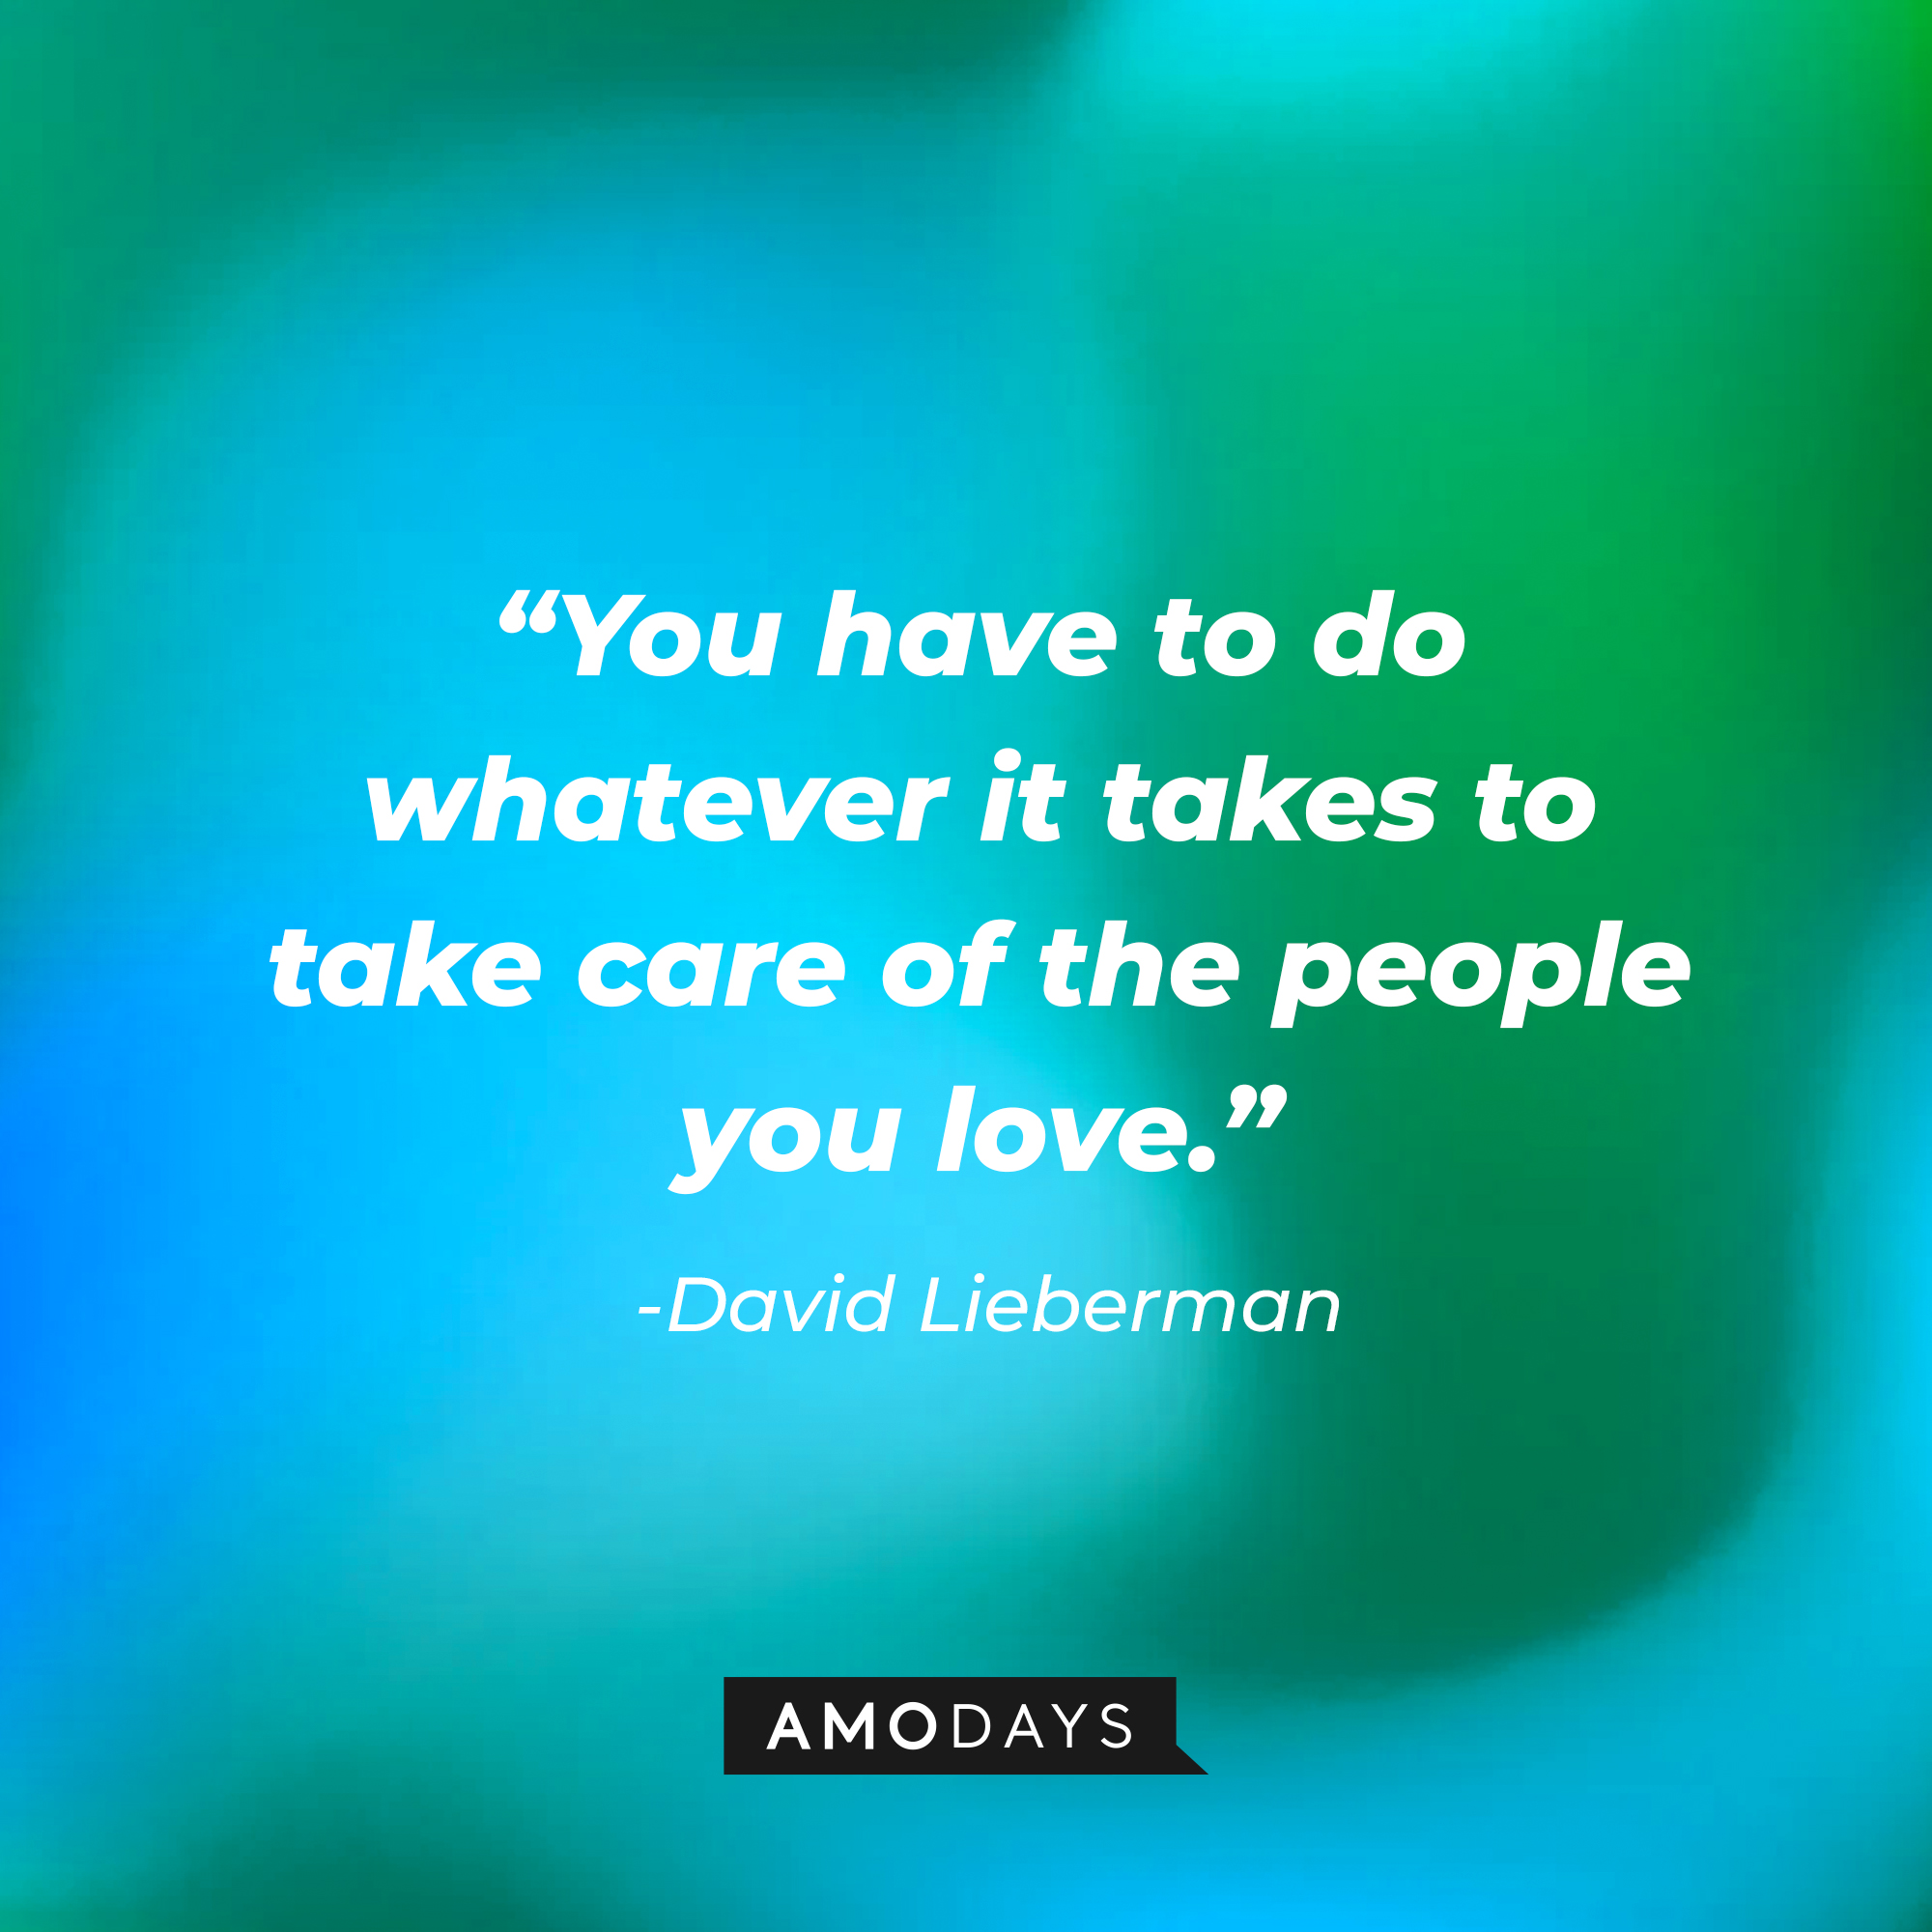 David Liebermans quote: “You have to do whatever it takes to take care of the people you love.” | Source: AmoDays